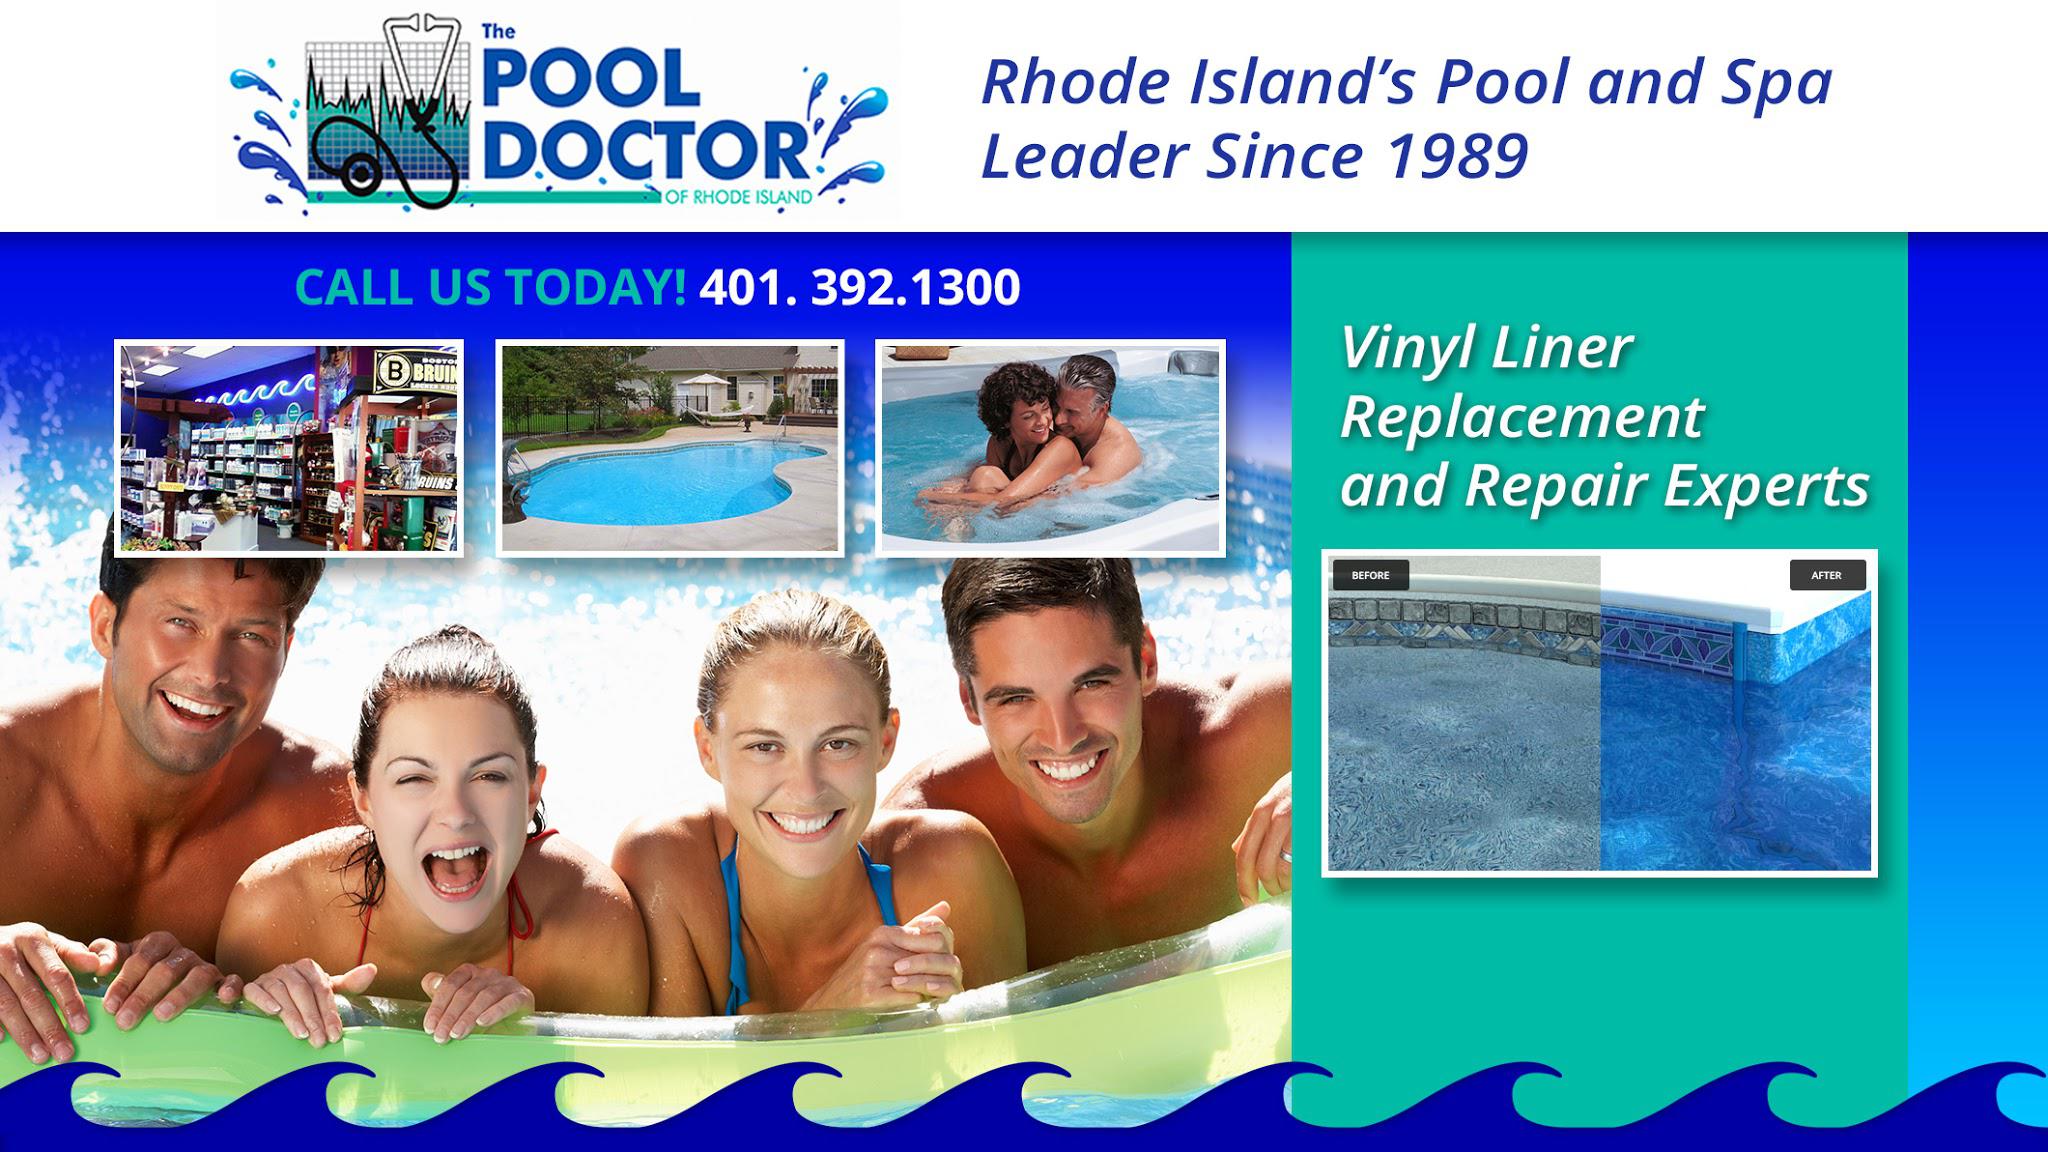 Pool Doctor of Rhode Island's cover image